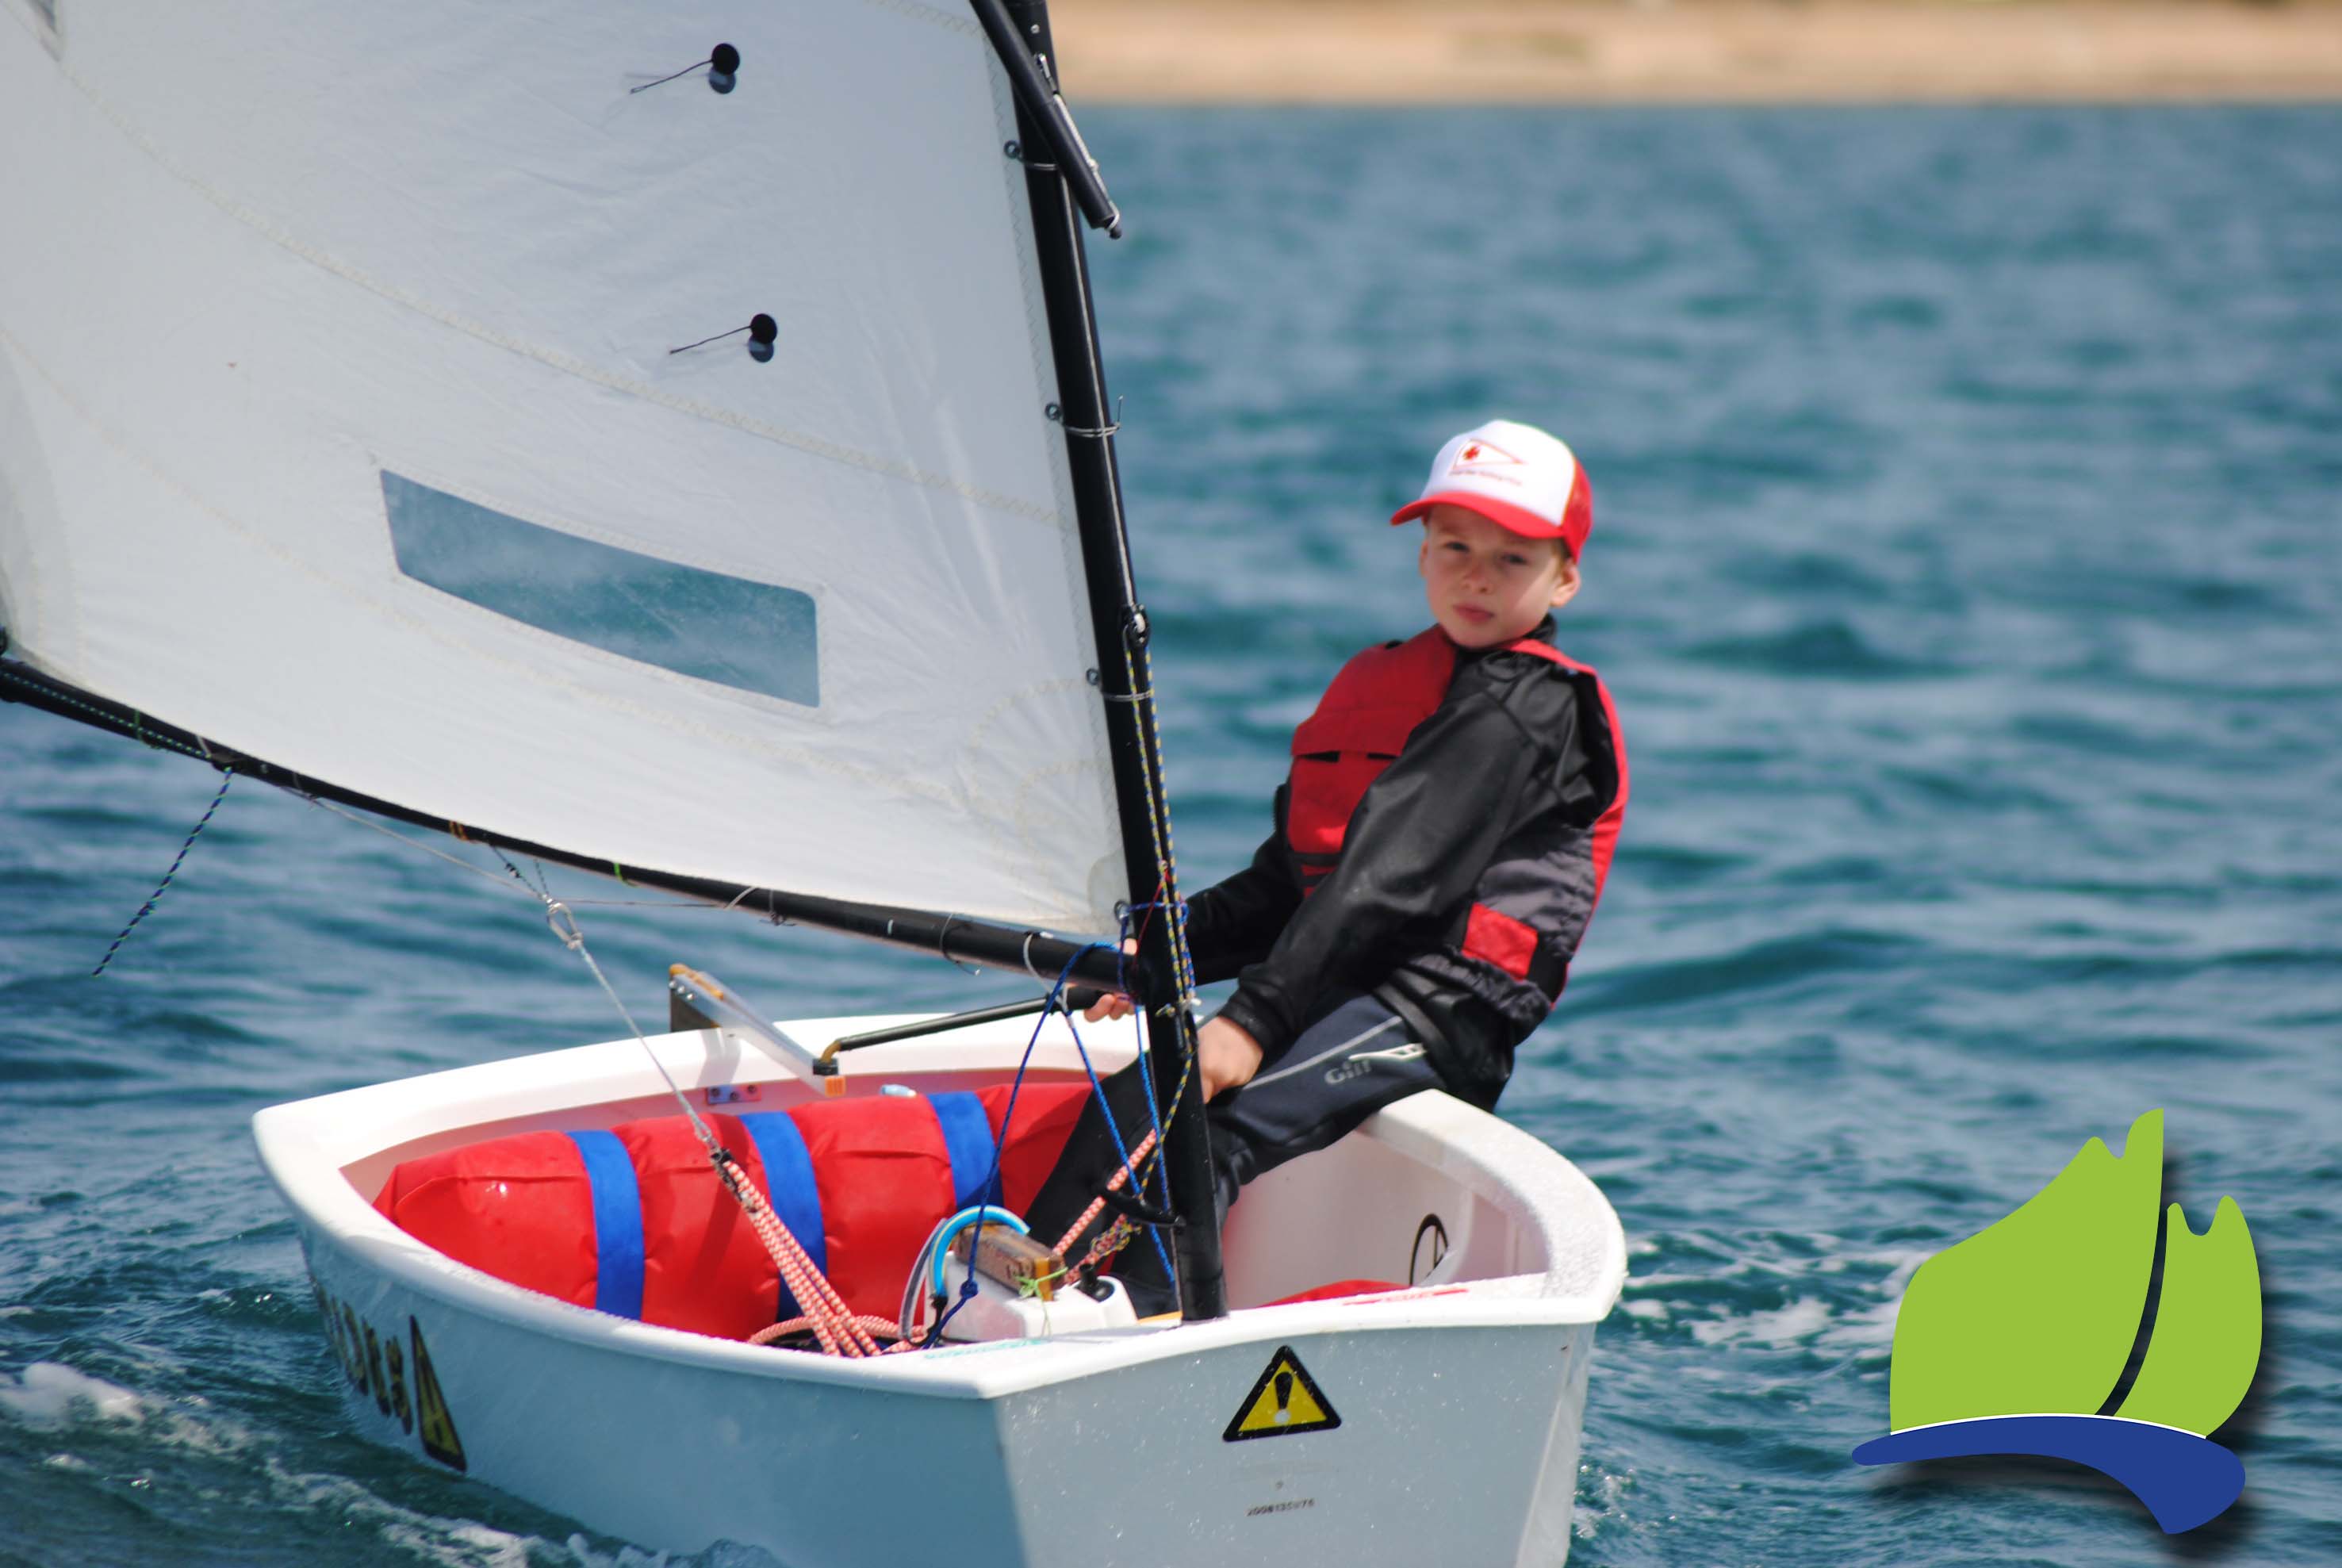 Archie Kretschmer, Largs Bay Sailing Club, was the overall winner in the optimist green fleet.